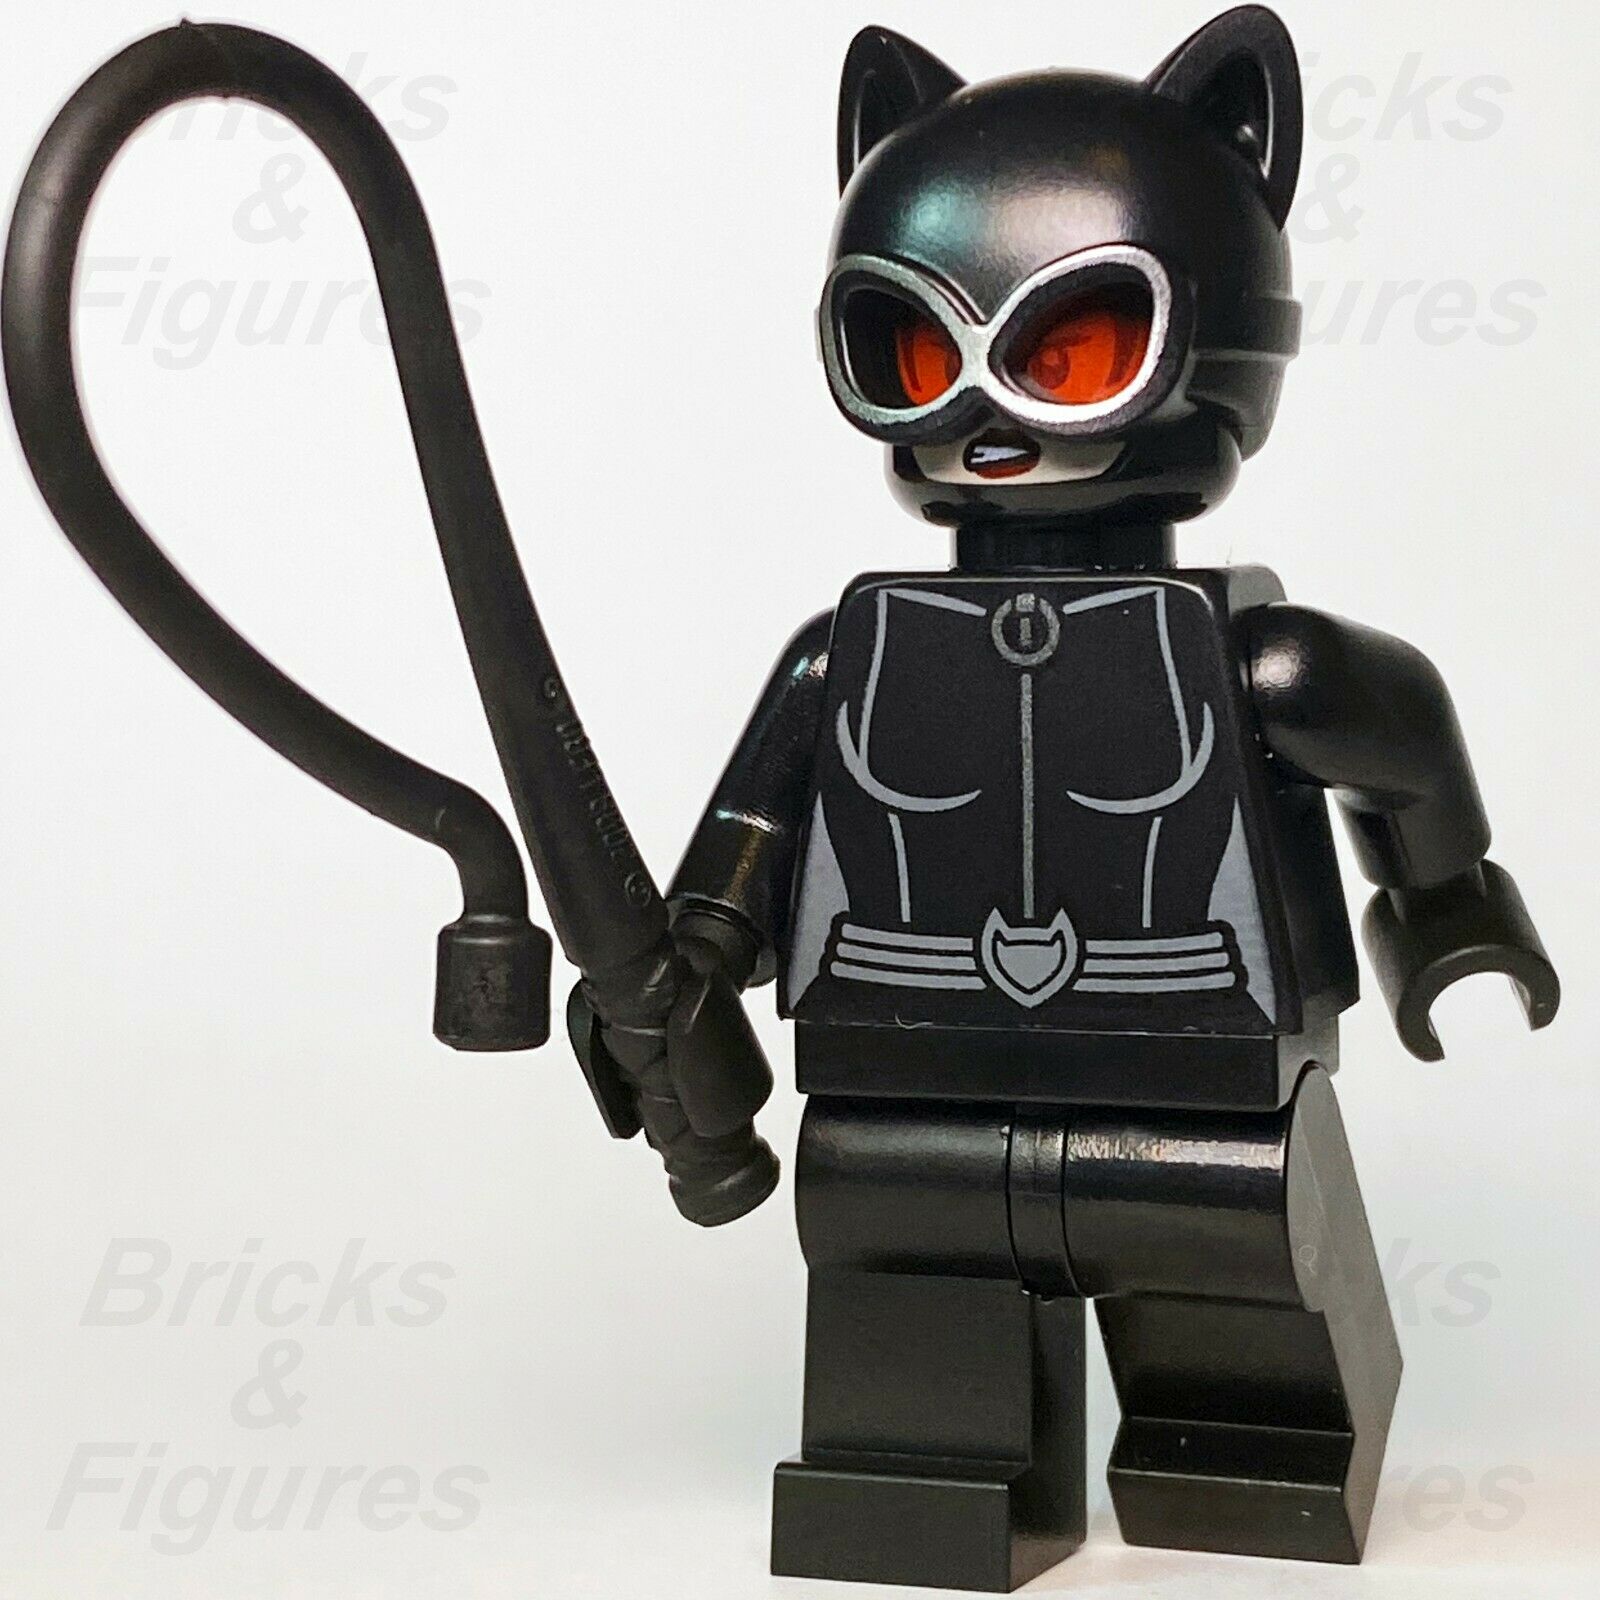 DC Super Heroes LEGO Catwoman with Red Goggles Batman 2 Minifigure 76122 - Bricks & Figures